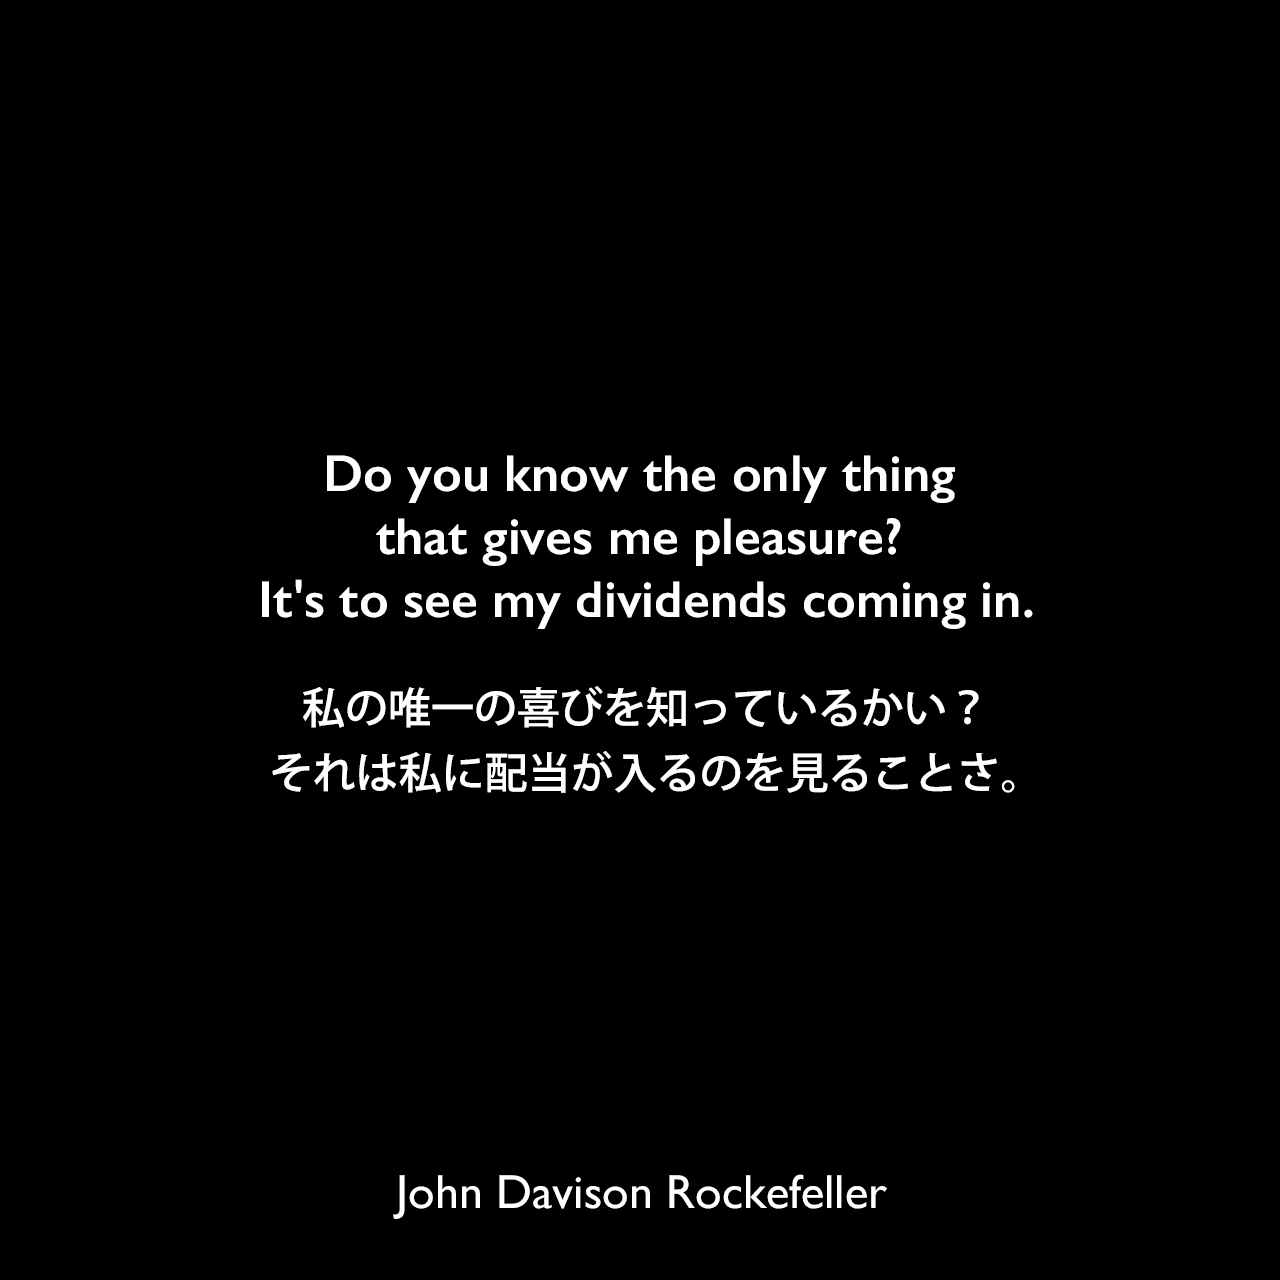 Do you know the only thing that gives me pleasure? It's to see my dividends coming in.私の唯一の喜びを知っているかい？それは私に配当が入るのを見ることさ。John Davison Rockefeller